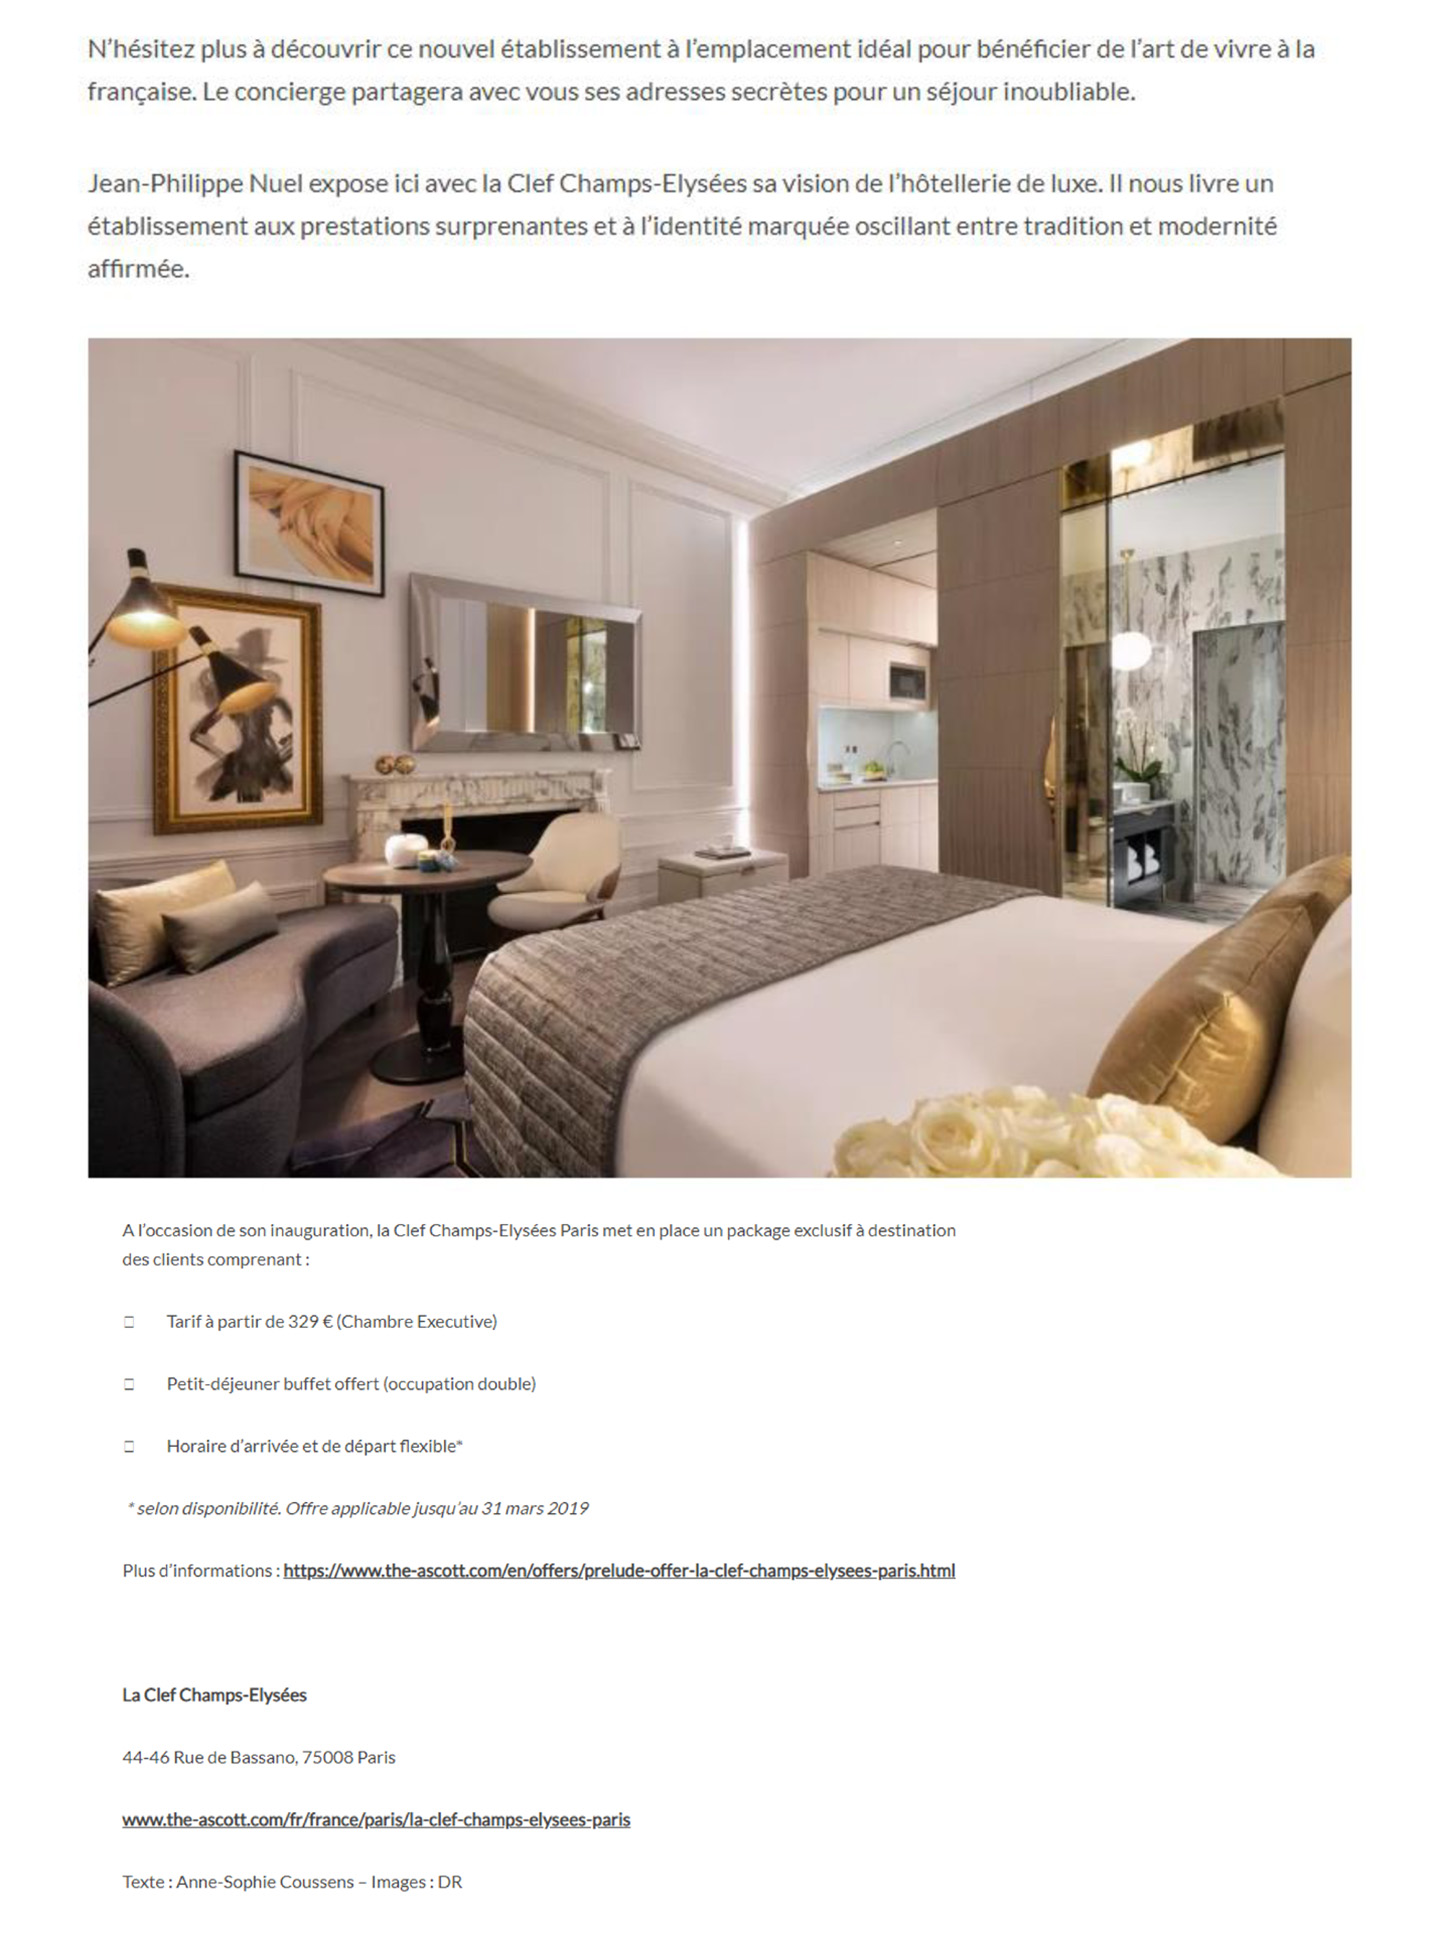 article on the 5 star parisian hotel la clef champs elysées decorated and designed by the interior design studio jean-philippe nuel